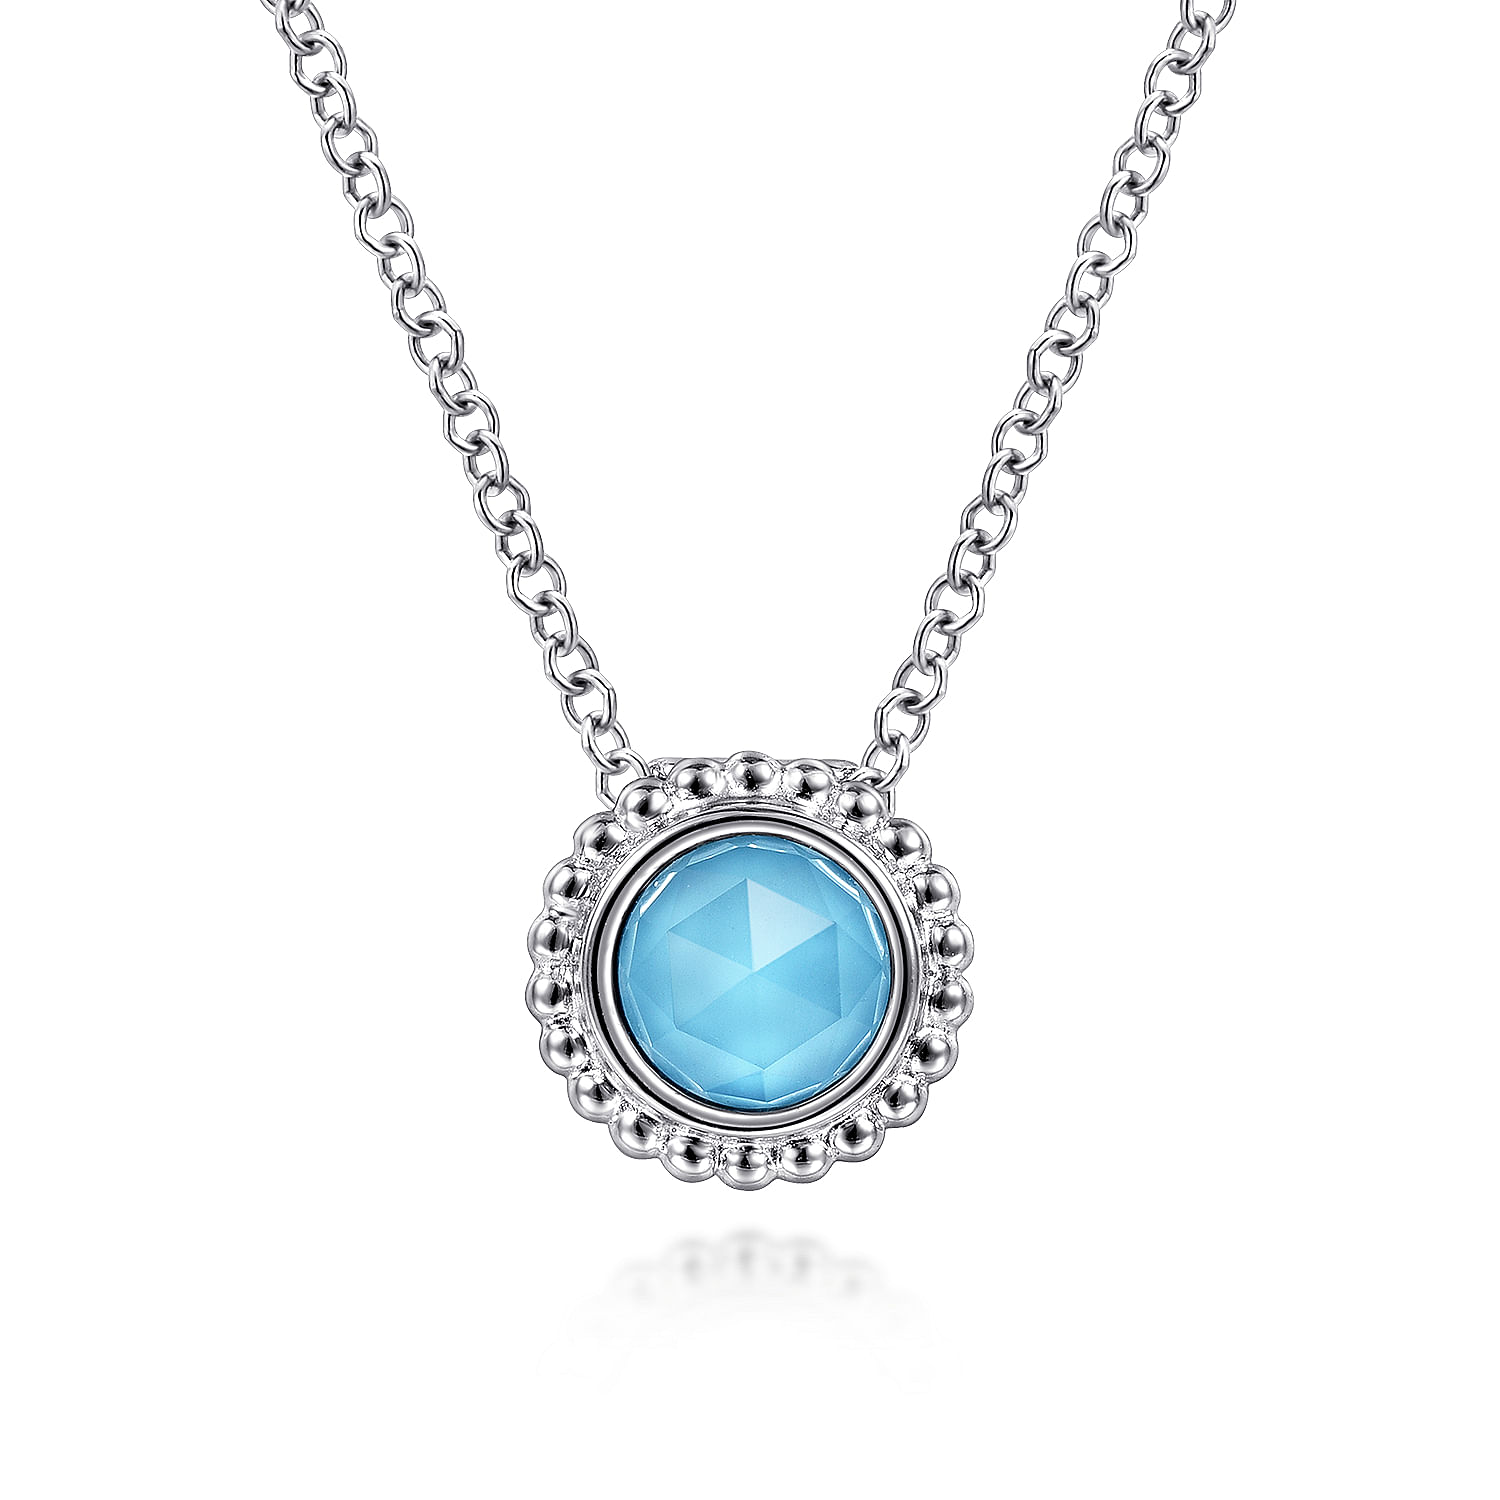 925 Sterling Silver Bujukan Rock Crystal and Turquoise Pendant Necklace